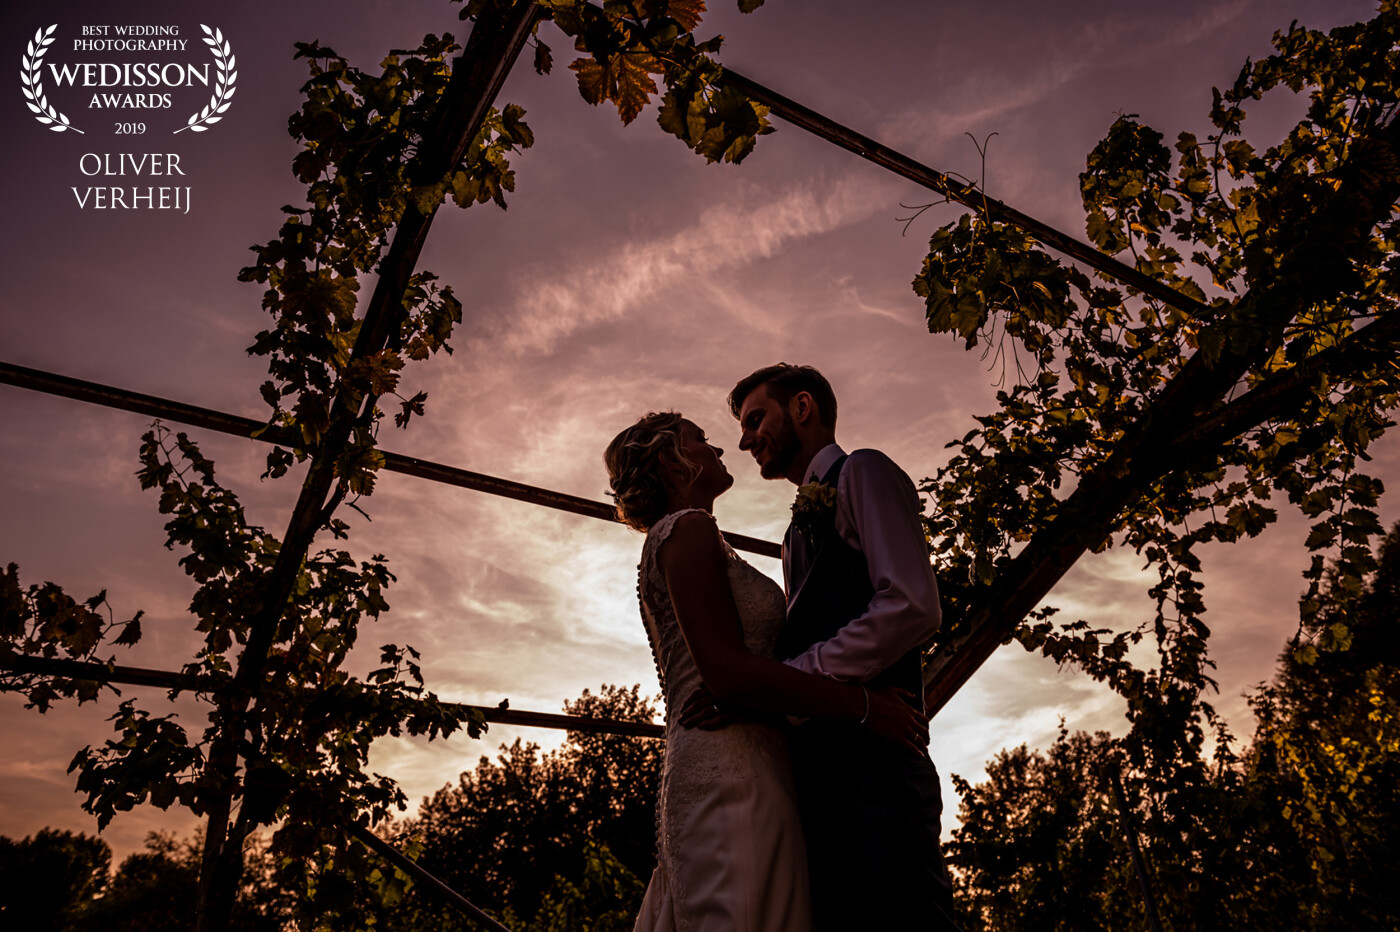 After the dinner, when the light was awesome, I took the couple outside into a vineyard where I made this awesome semi-silhouette.<br />
<br />
<br />
